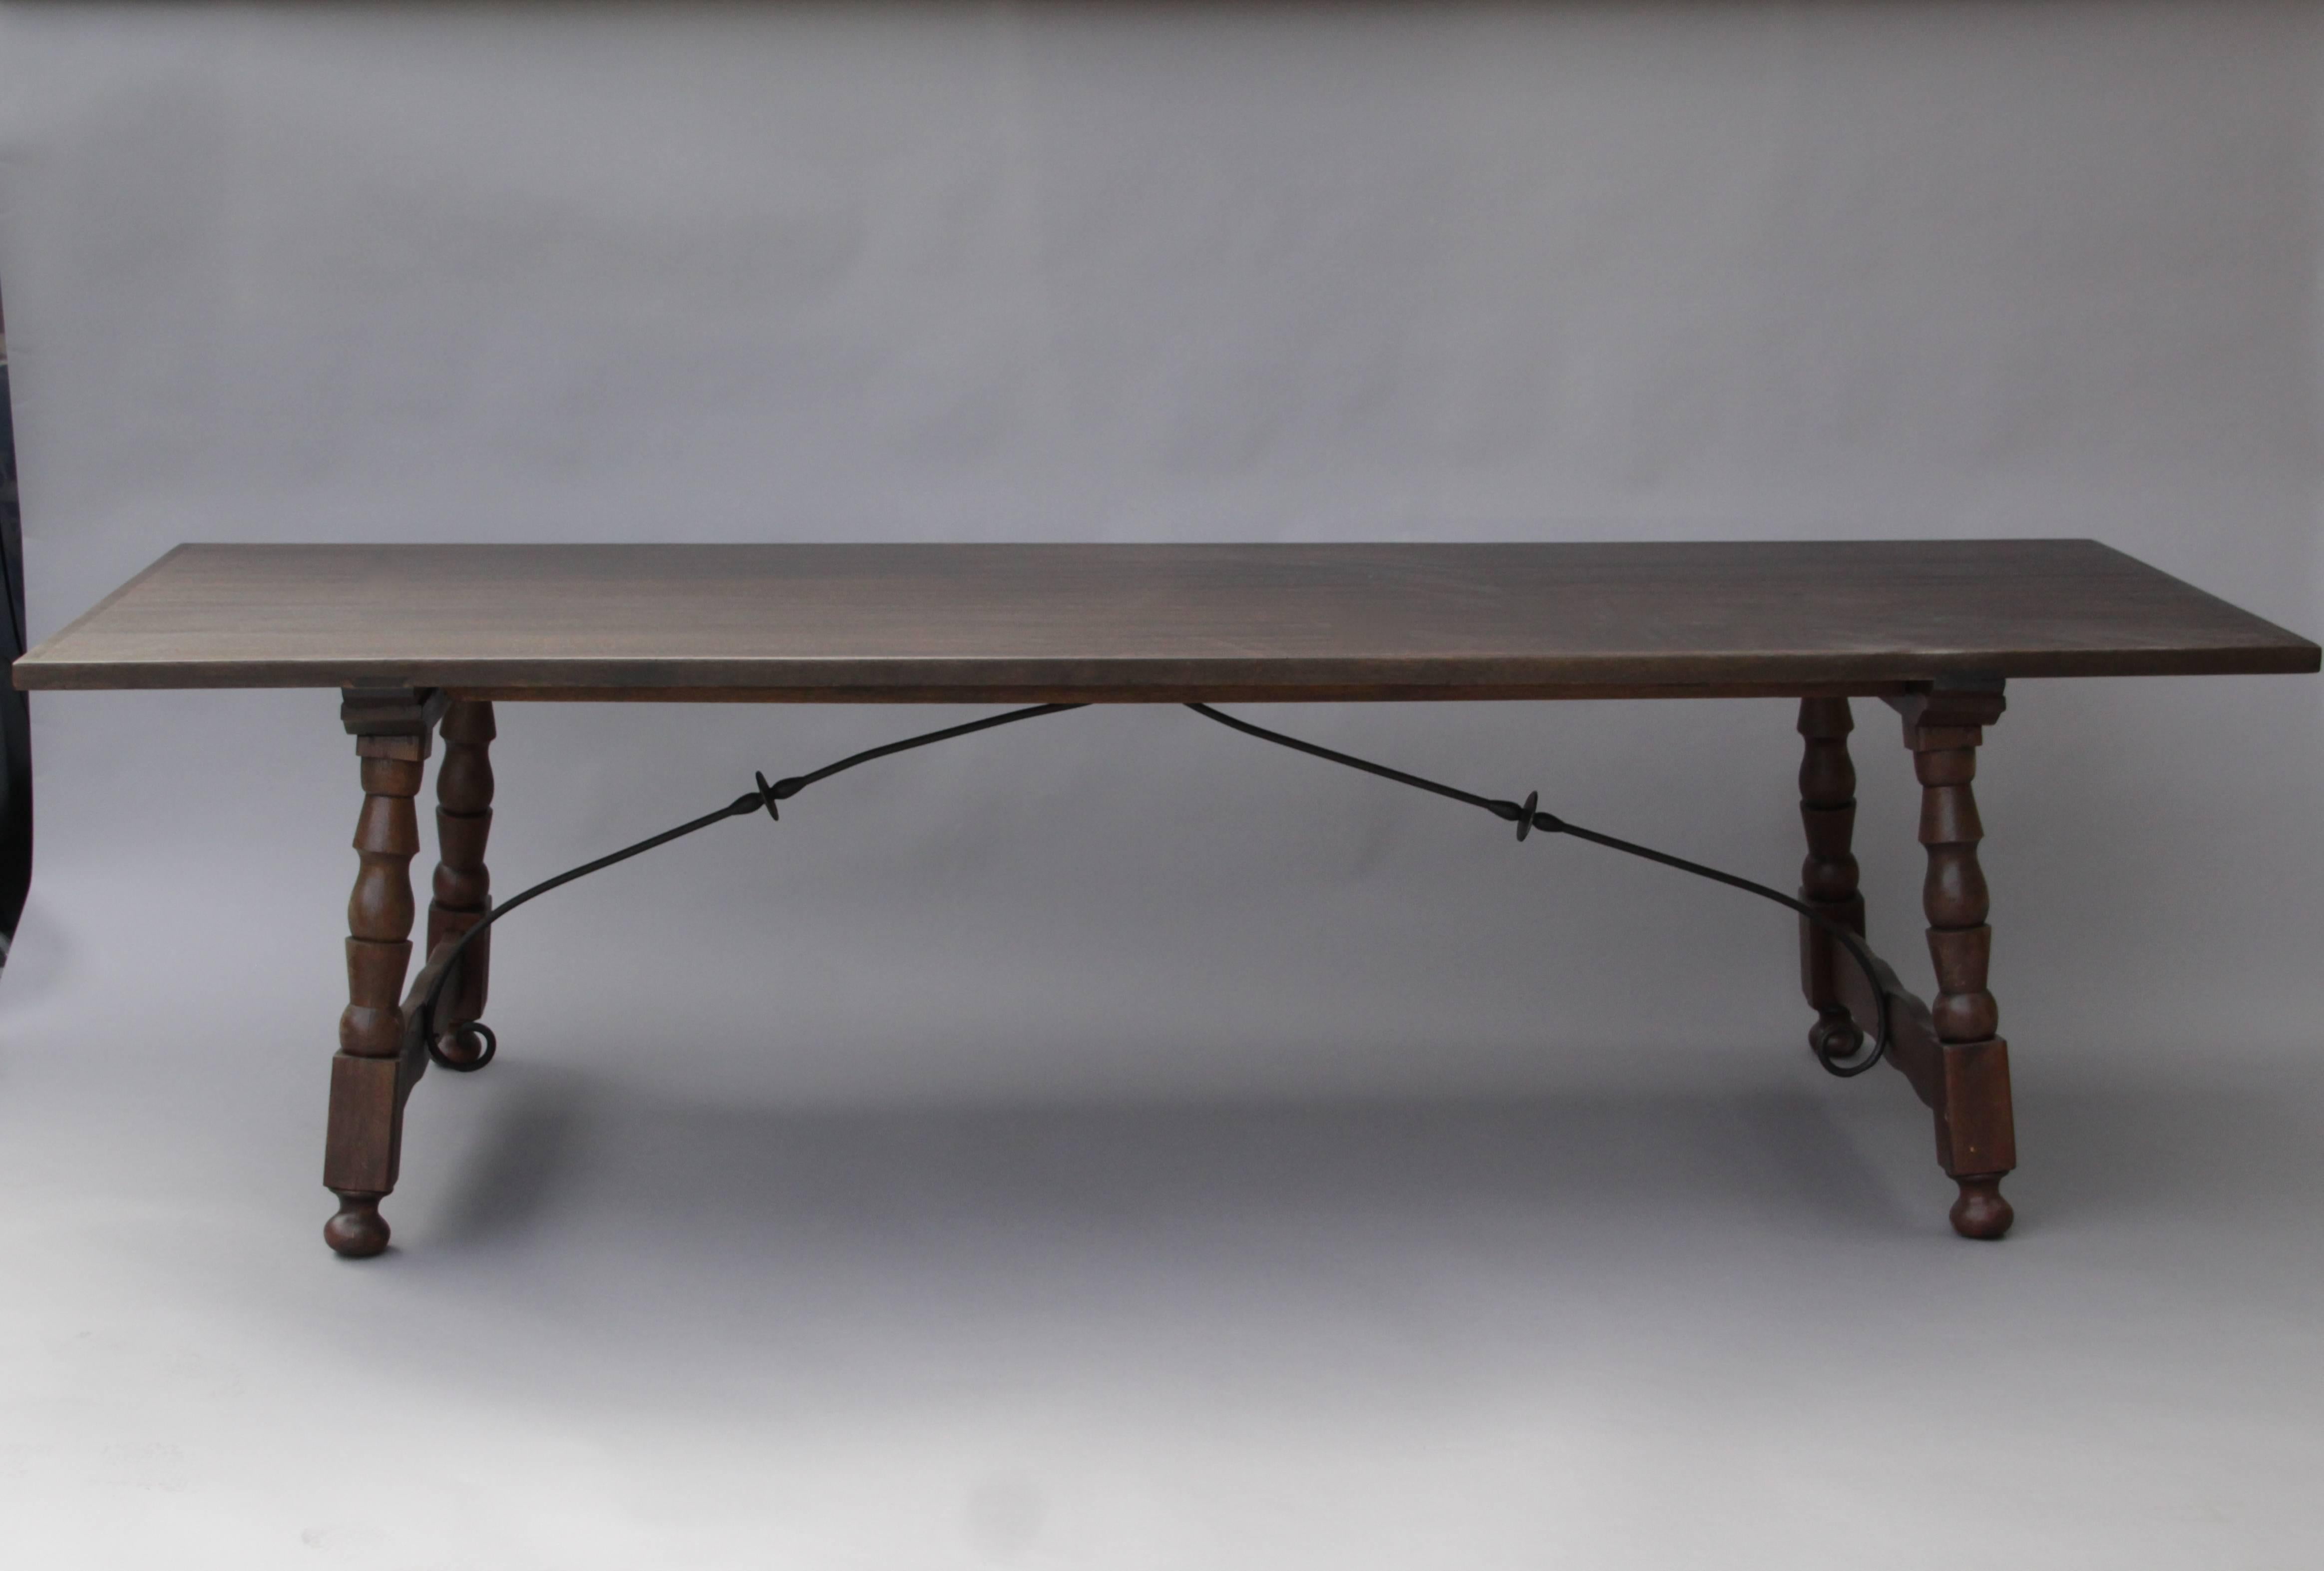 Attractive Spanish Revival table with iron trestle and splayed legs, circa 1920s.